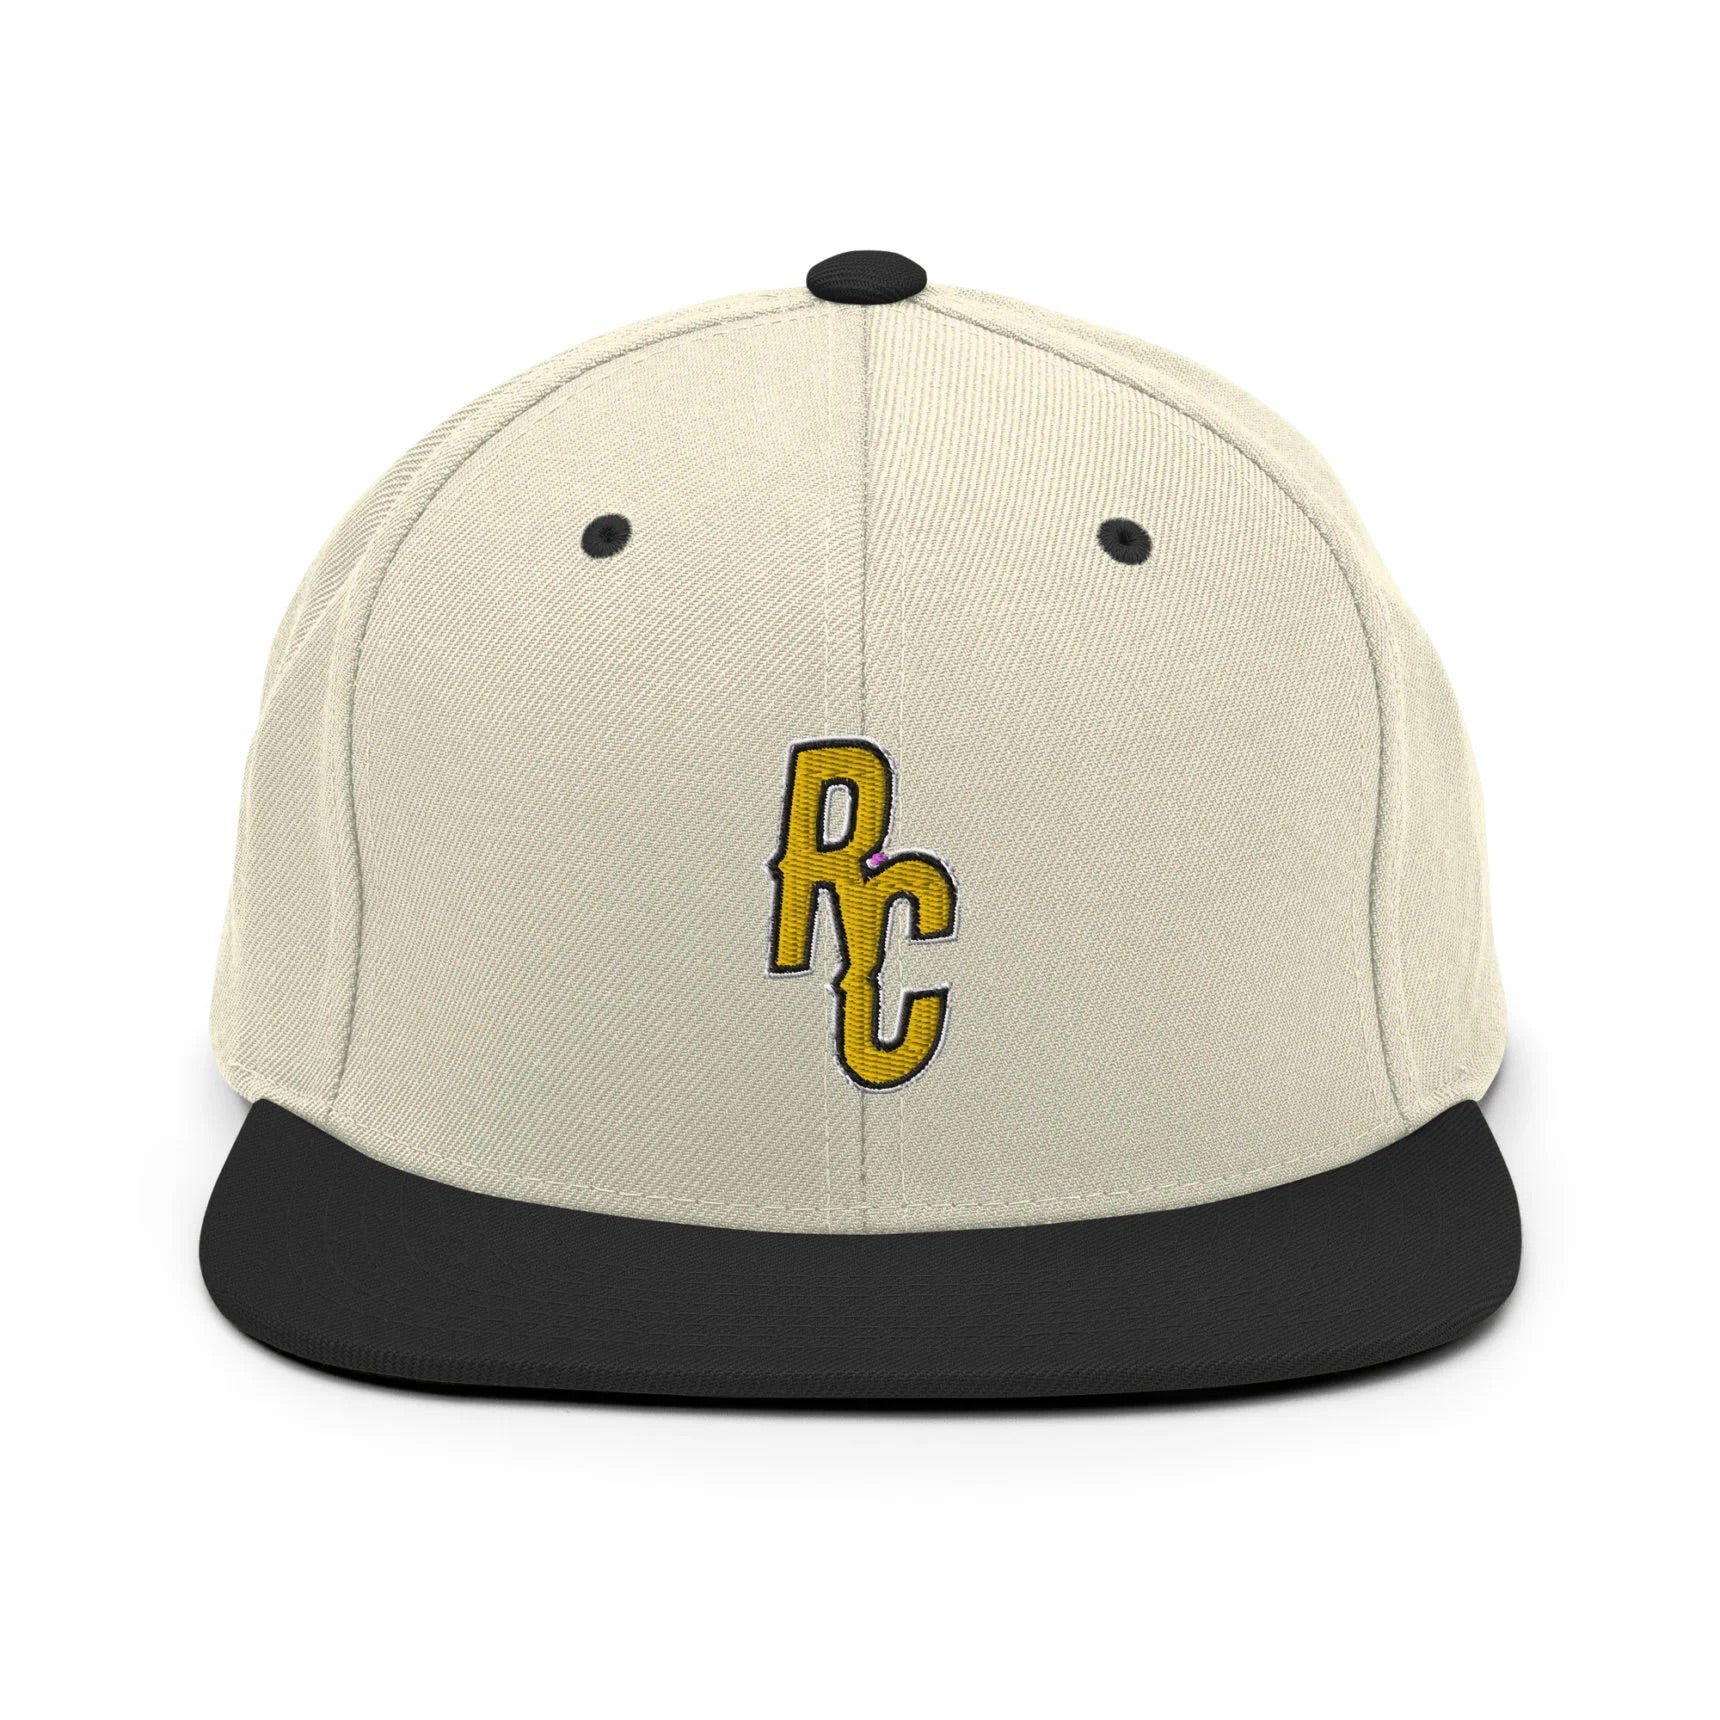 Ray Cheesy ShowZone snapback hat in natural white with black brim and accents